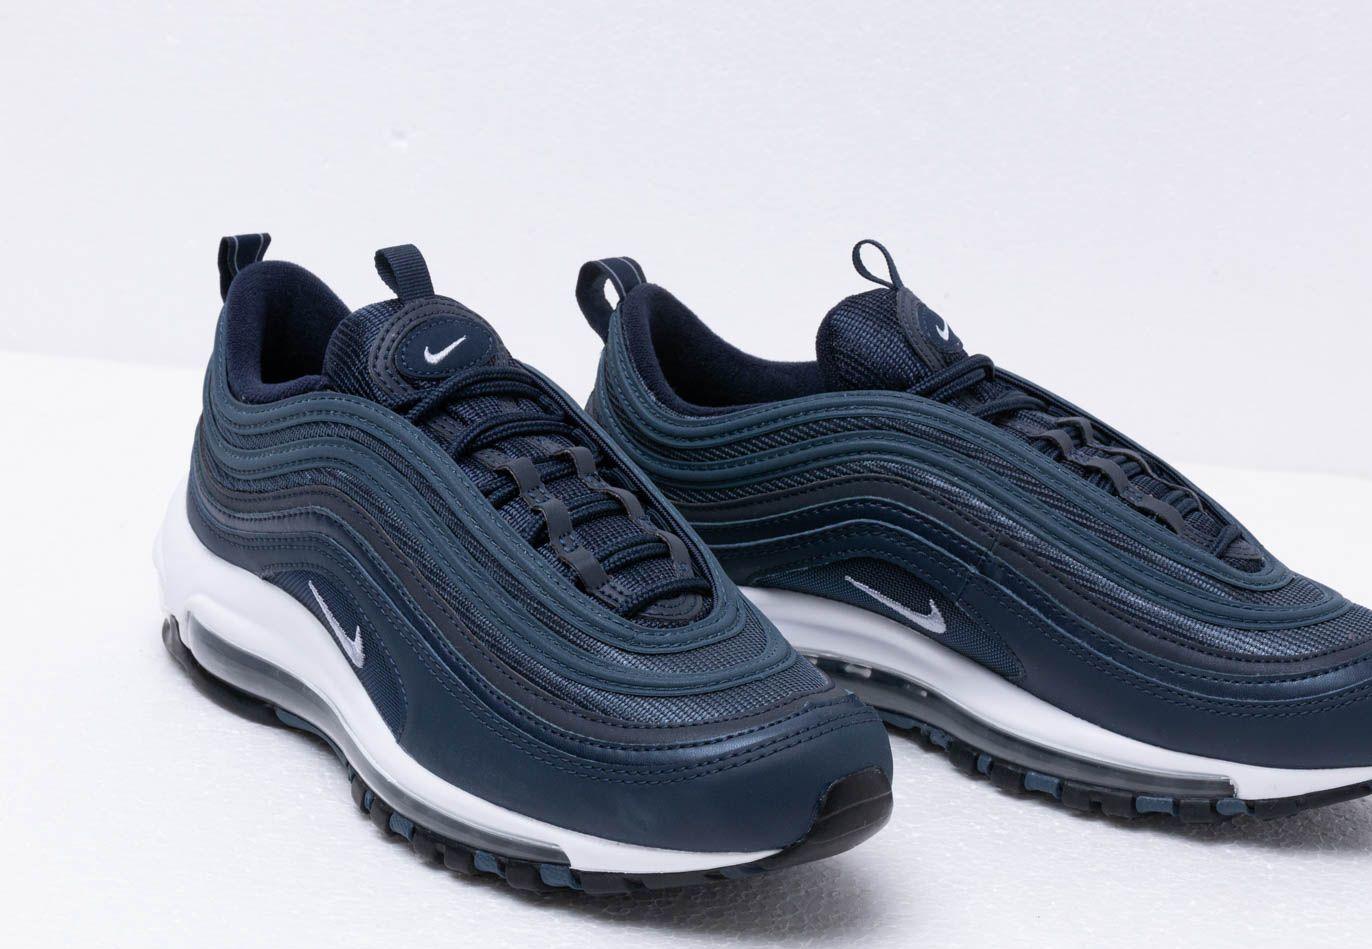 Nike Men's Air Max 97 Track & Field Shoes.uk